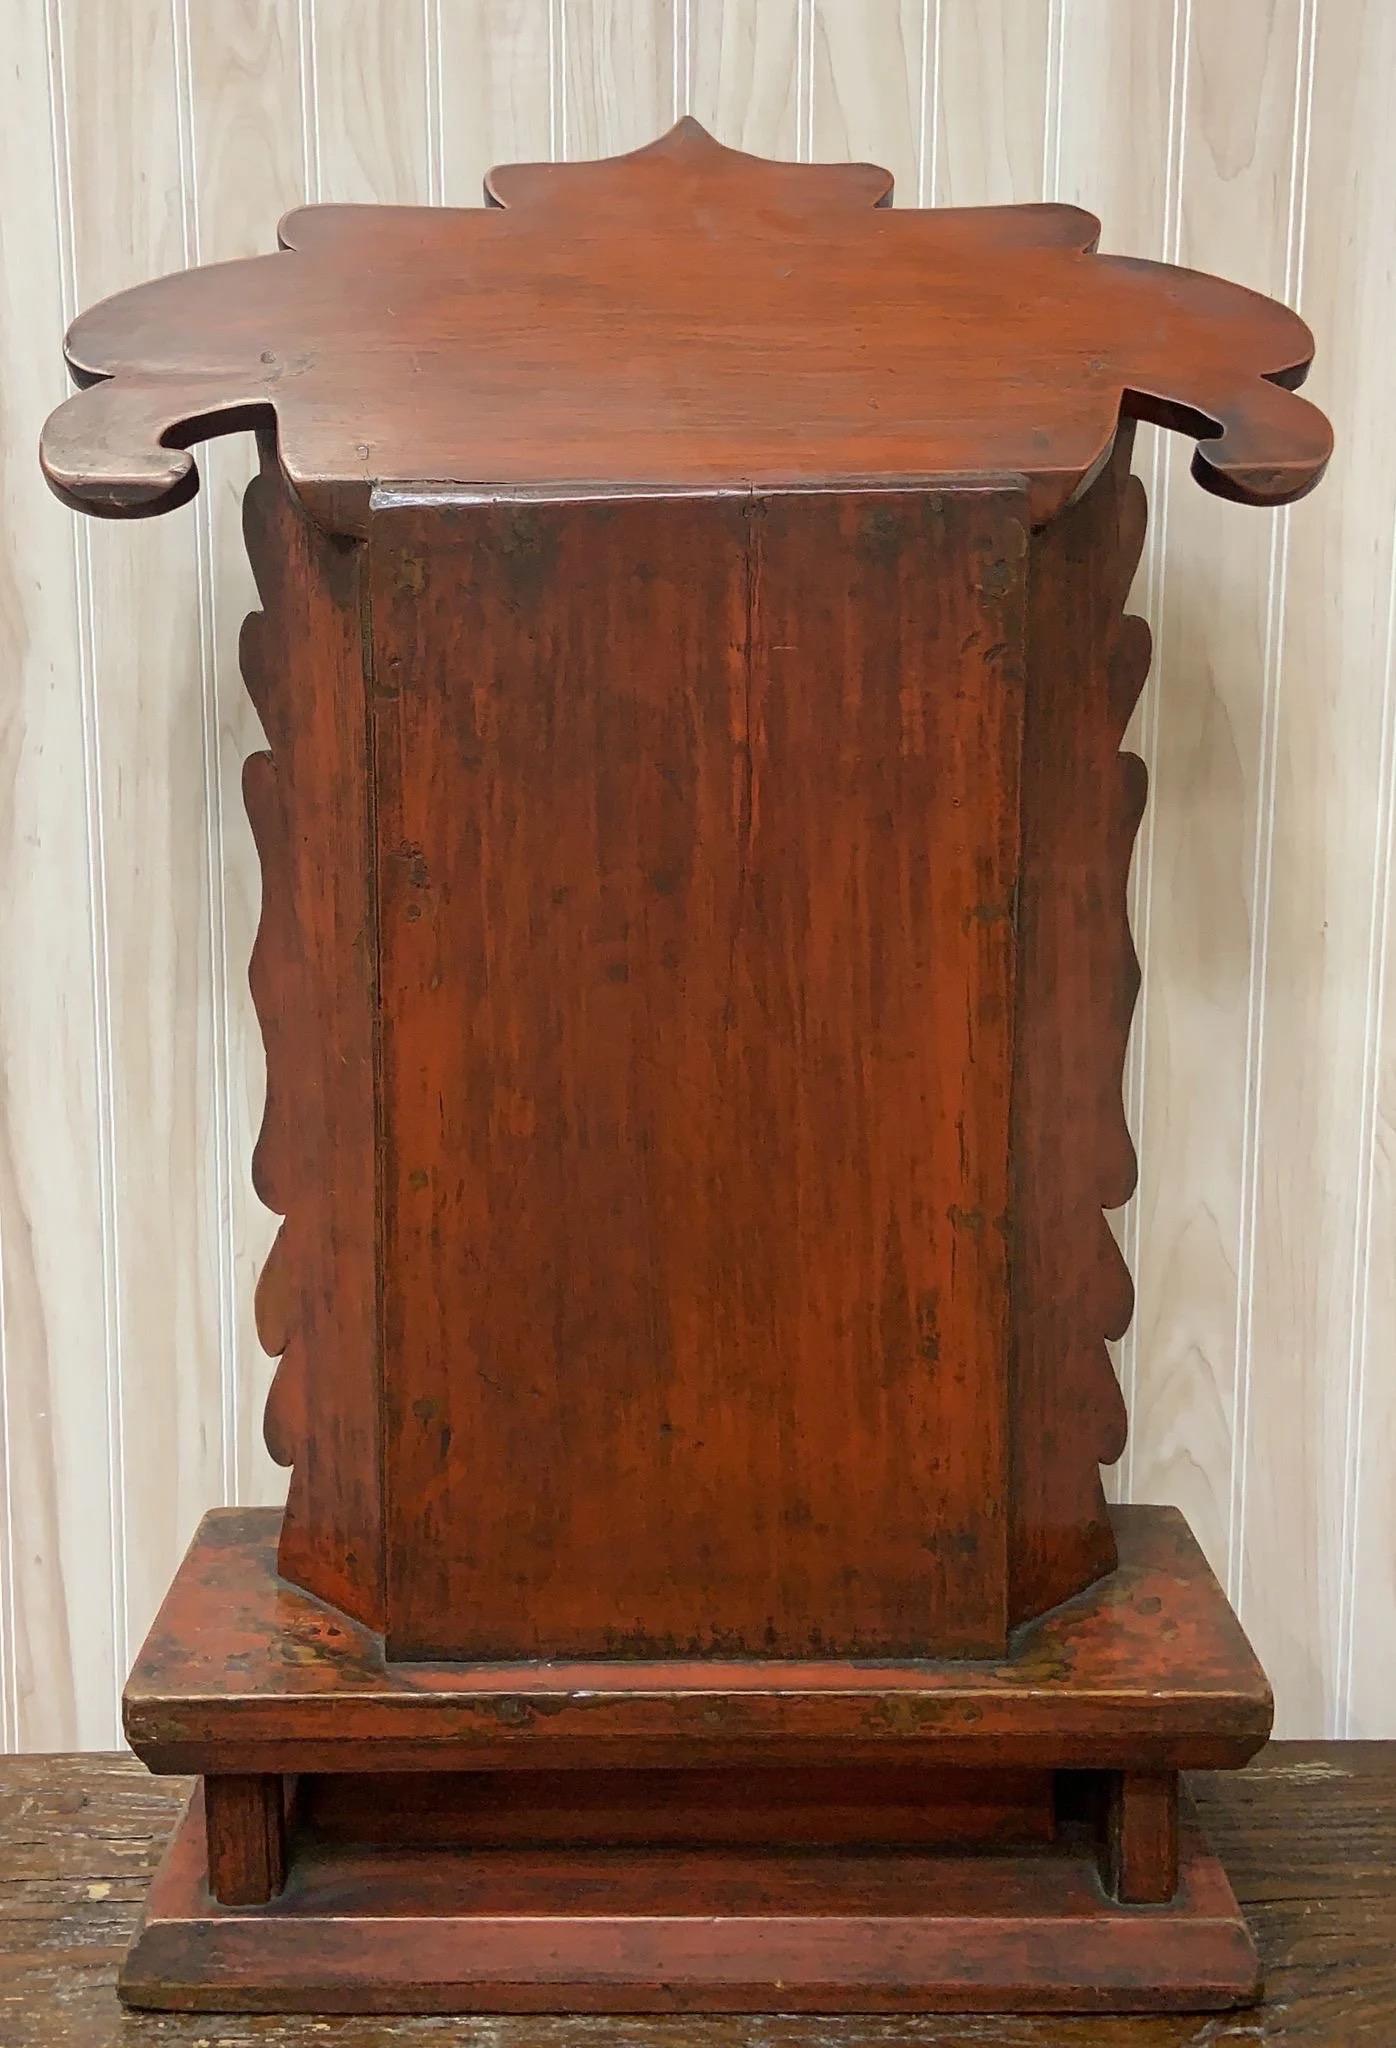 Antique Chinese Red Hand Painted Elm Ancestral Shrine / Altar

Made from durable elm wood, this altar features intricate hand-painted designs in vibrant red hues. With its traditional design and meticulous attention to detail, this altar serves as a